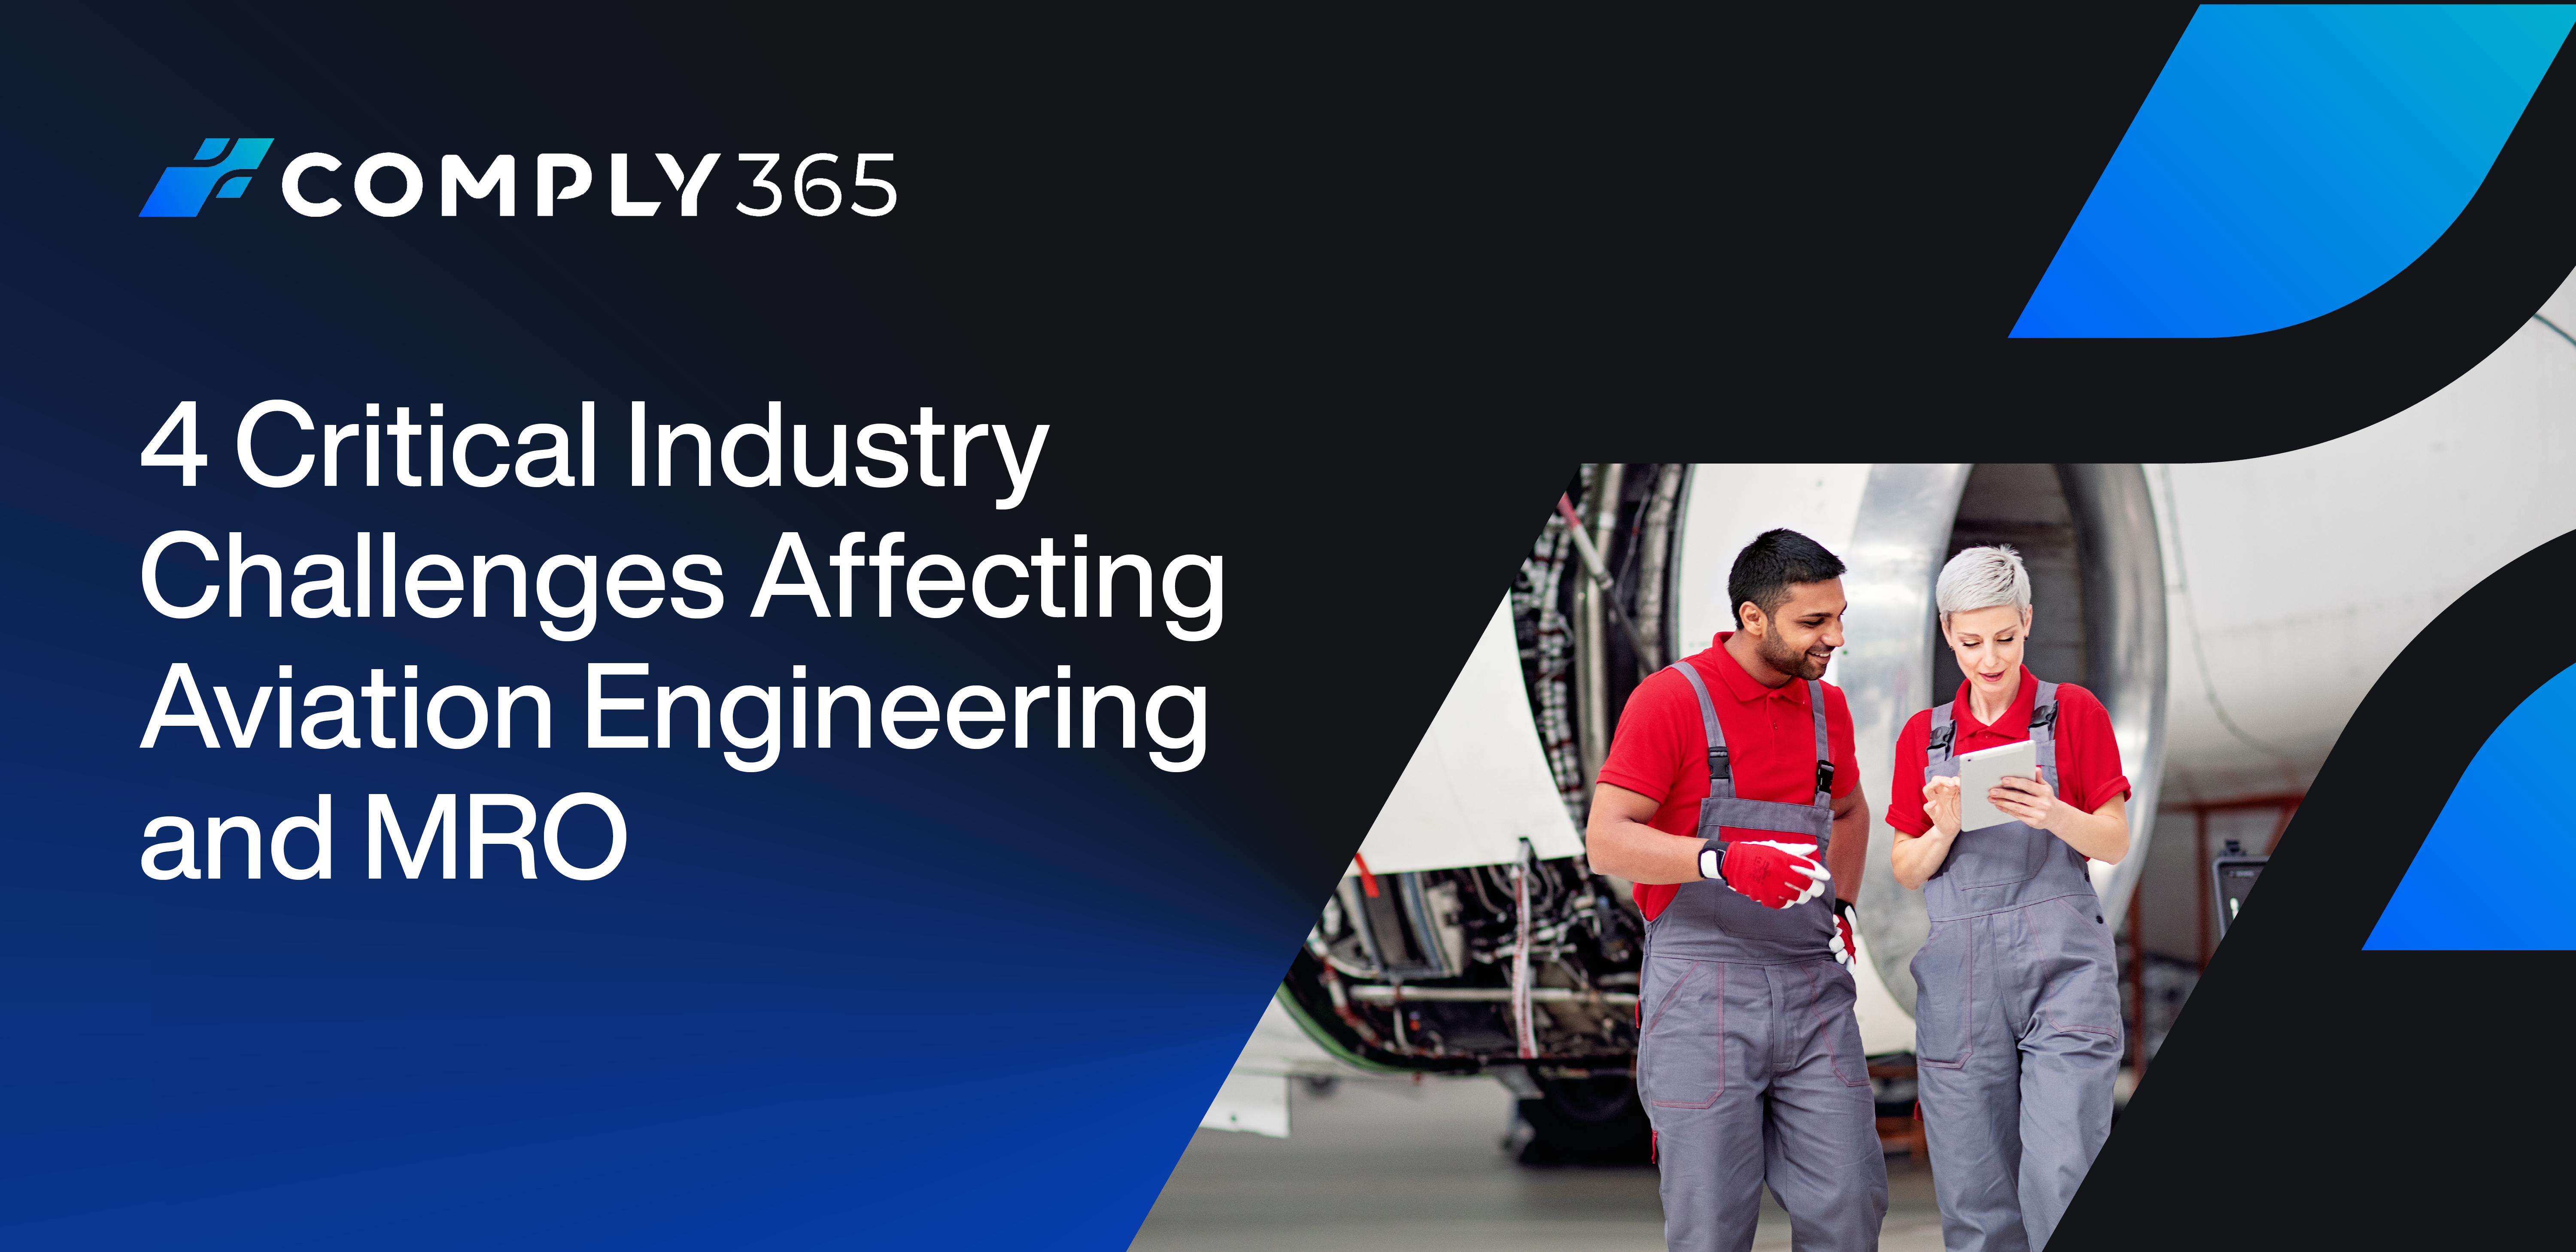 4 Critical Industry Challenges Affecting Aviation Engineering and MRO